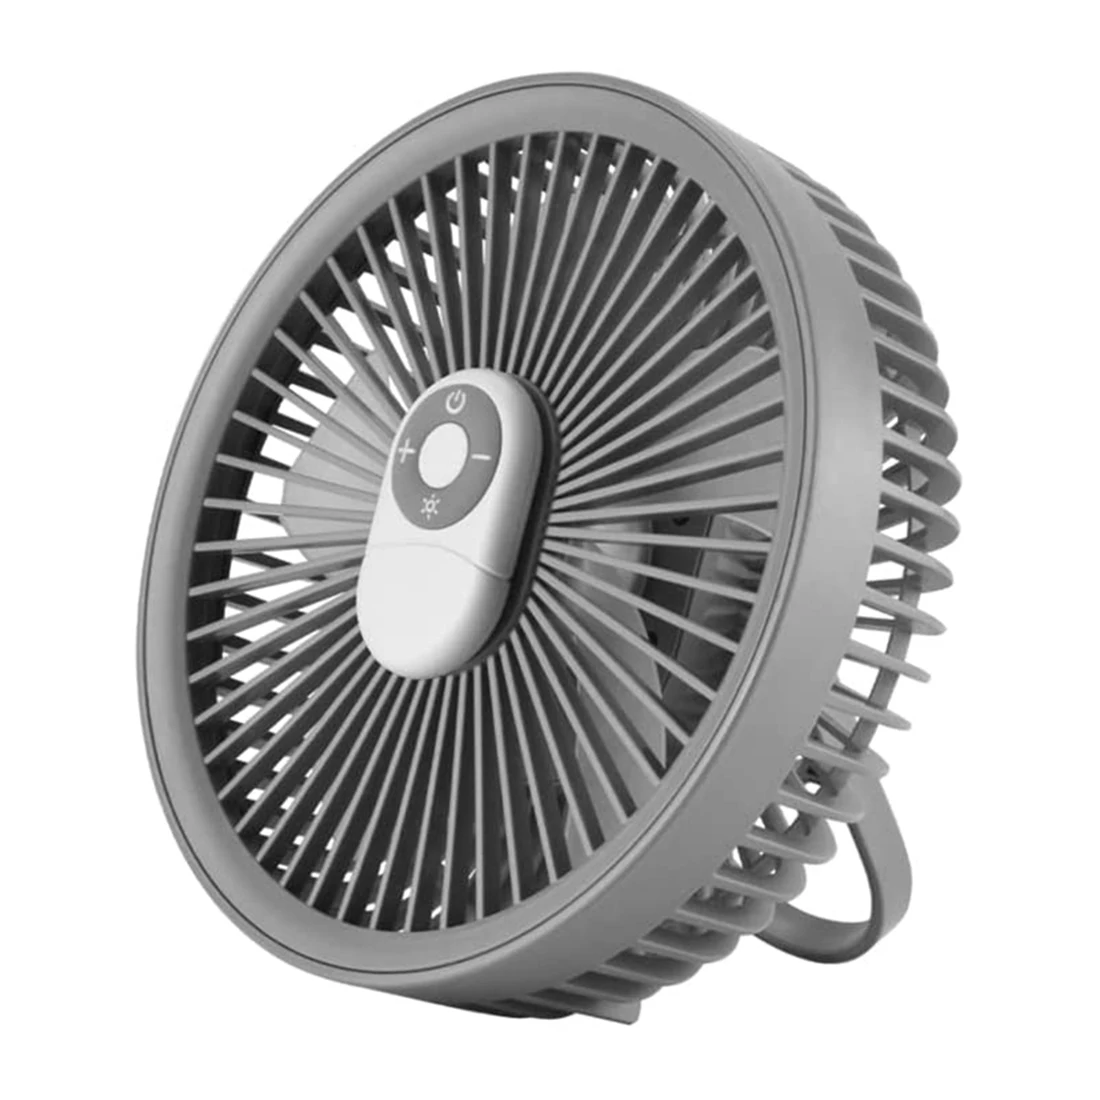 

Camping Fan with LED Lantern,4000MAh Outdoor Small Tent Fan,Portable Quiet Desk Fan for Picnic,BBQ,Fishing,Travel,Gray